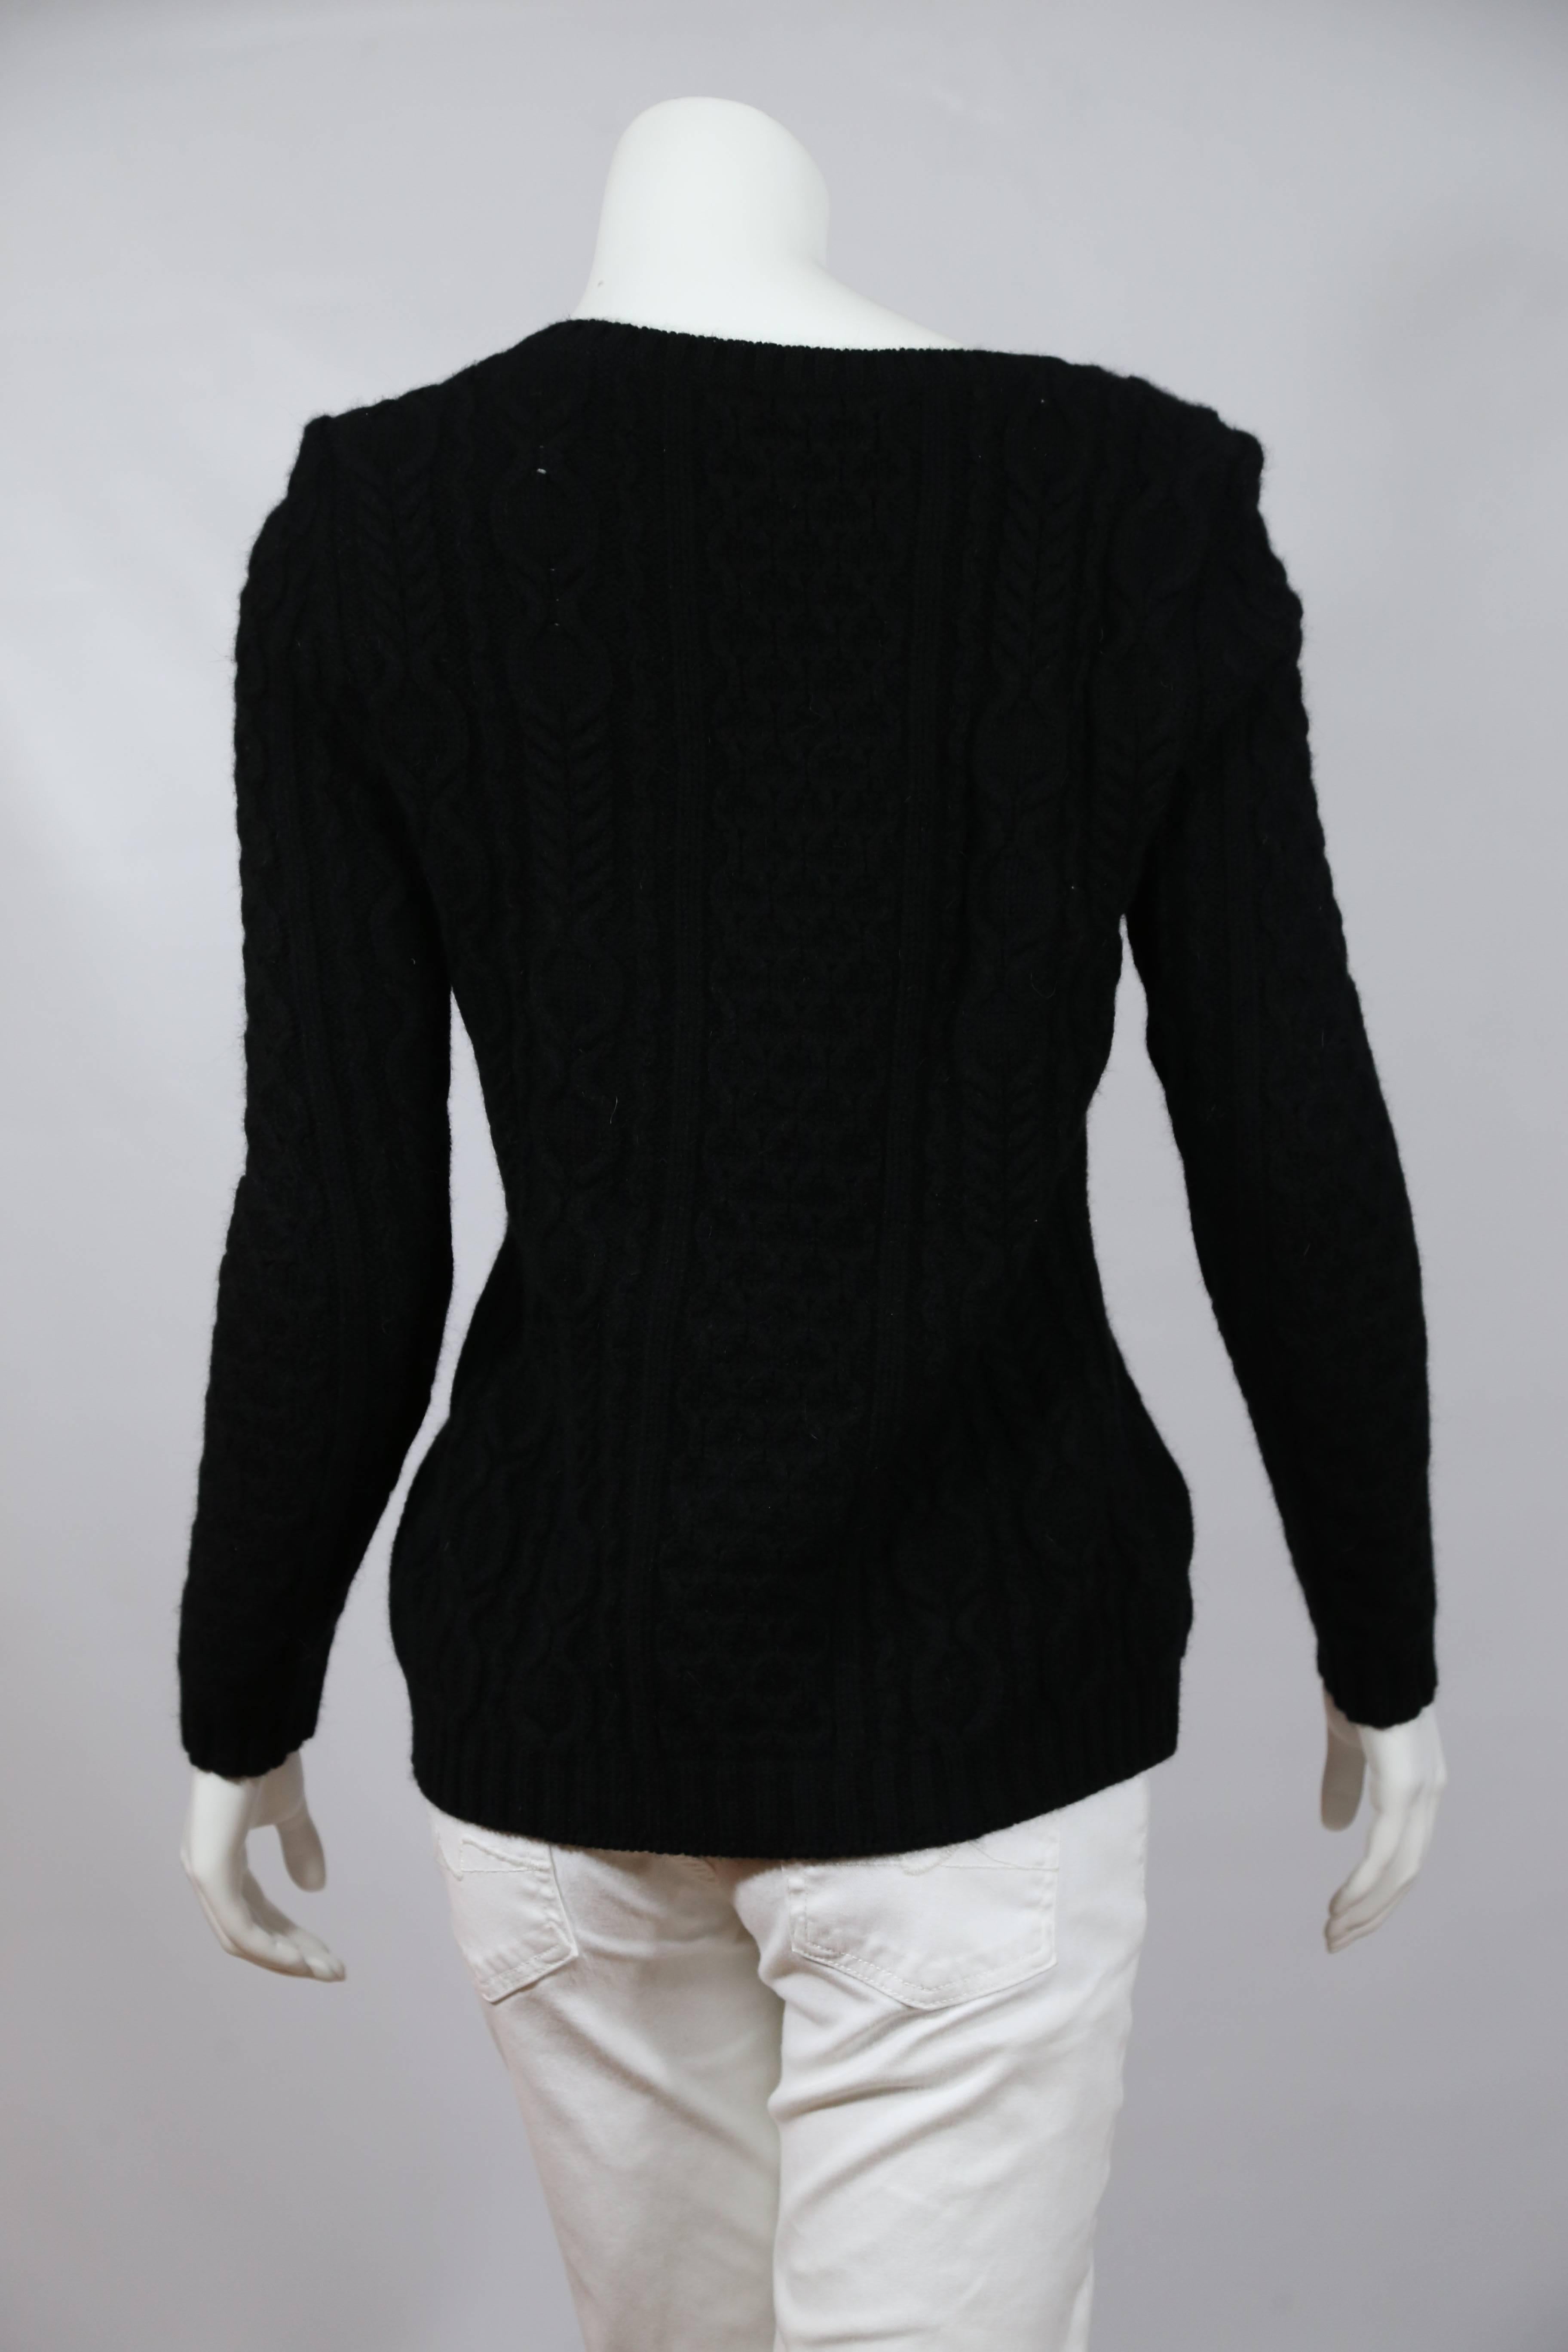 Christian Dior black  ribbed cashmere sweater. 